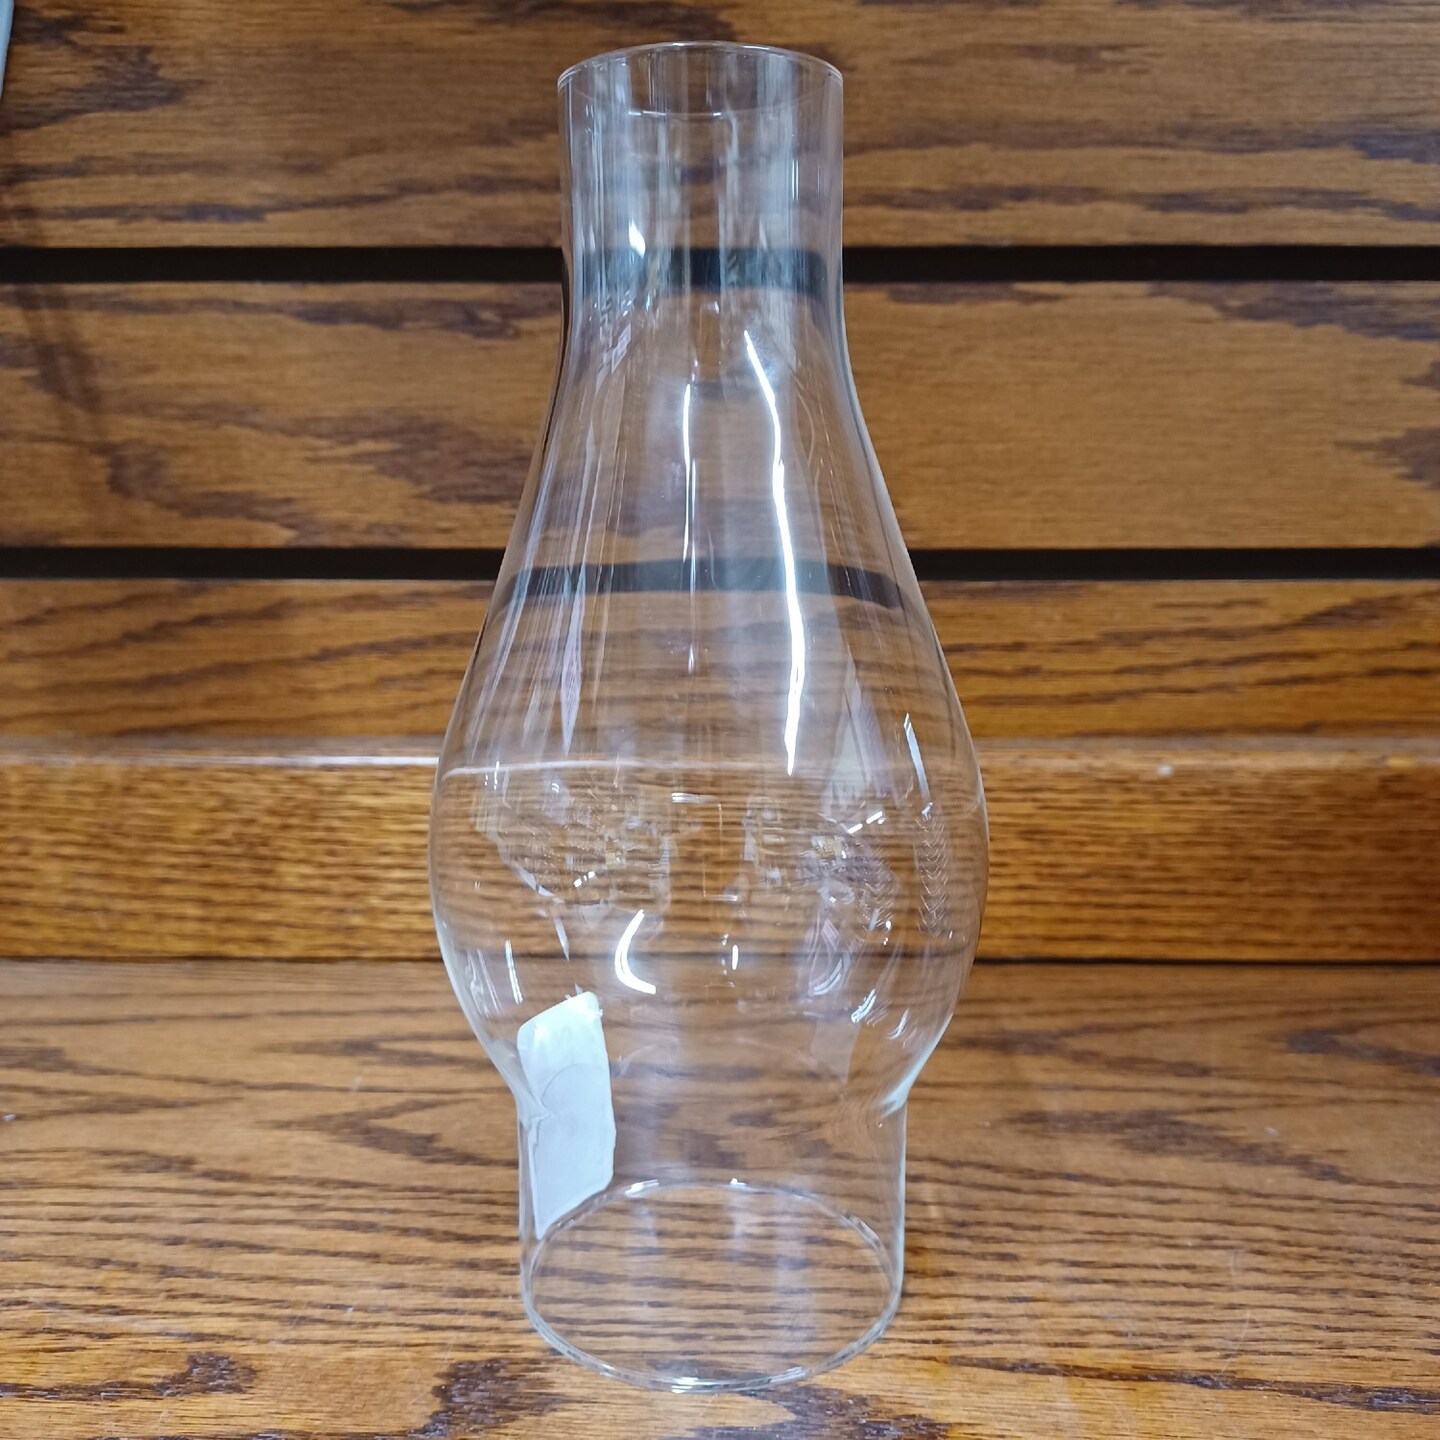 Clear Glass Lamp Chimney, Replacement Hurricane Globe Measures 2 3/8 Inch Diameter Base x 7 1/2 Inches High for Oil or Kerosene Lanterns